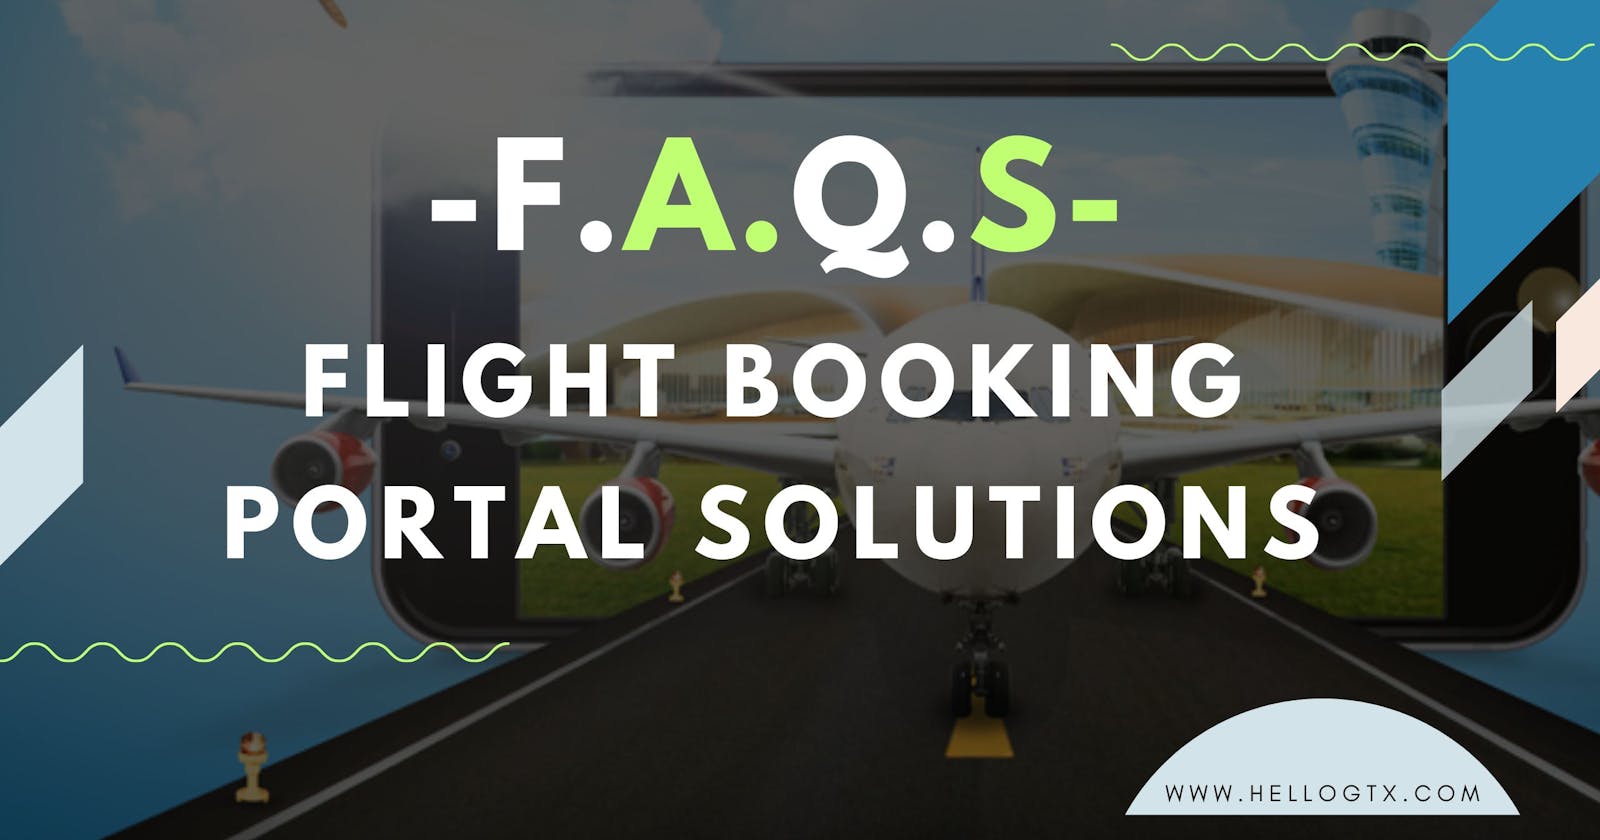 FAQs About Flight Booking Portal Solutions